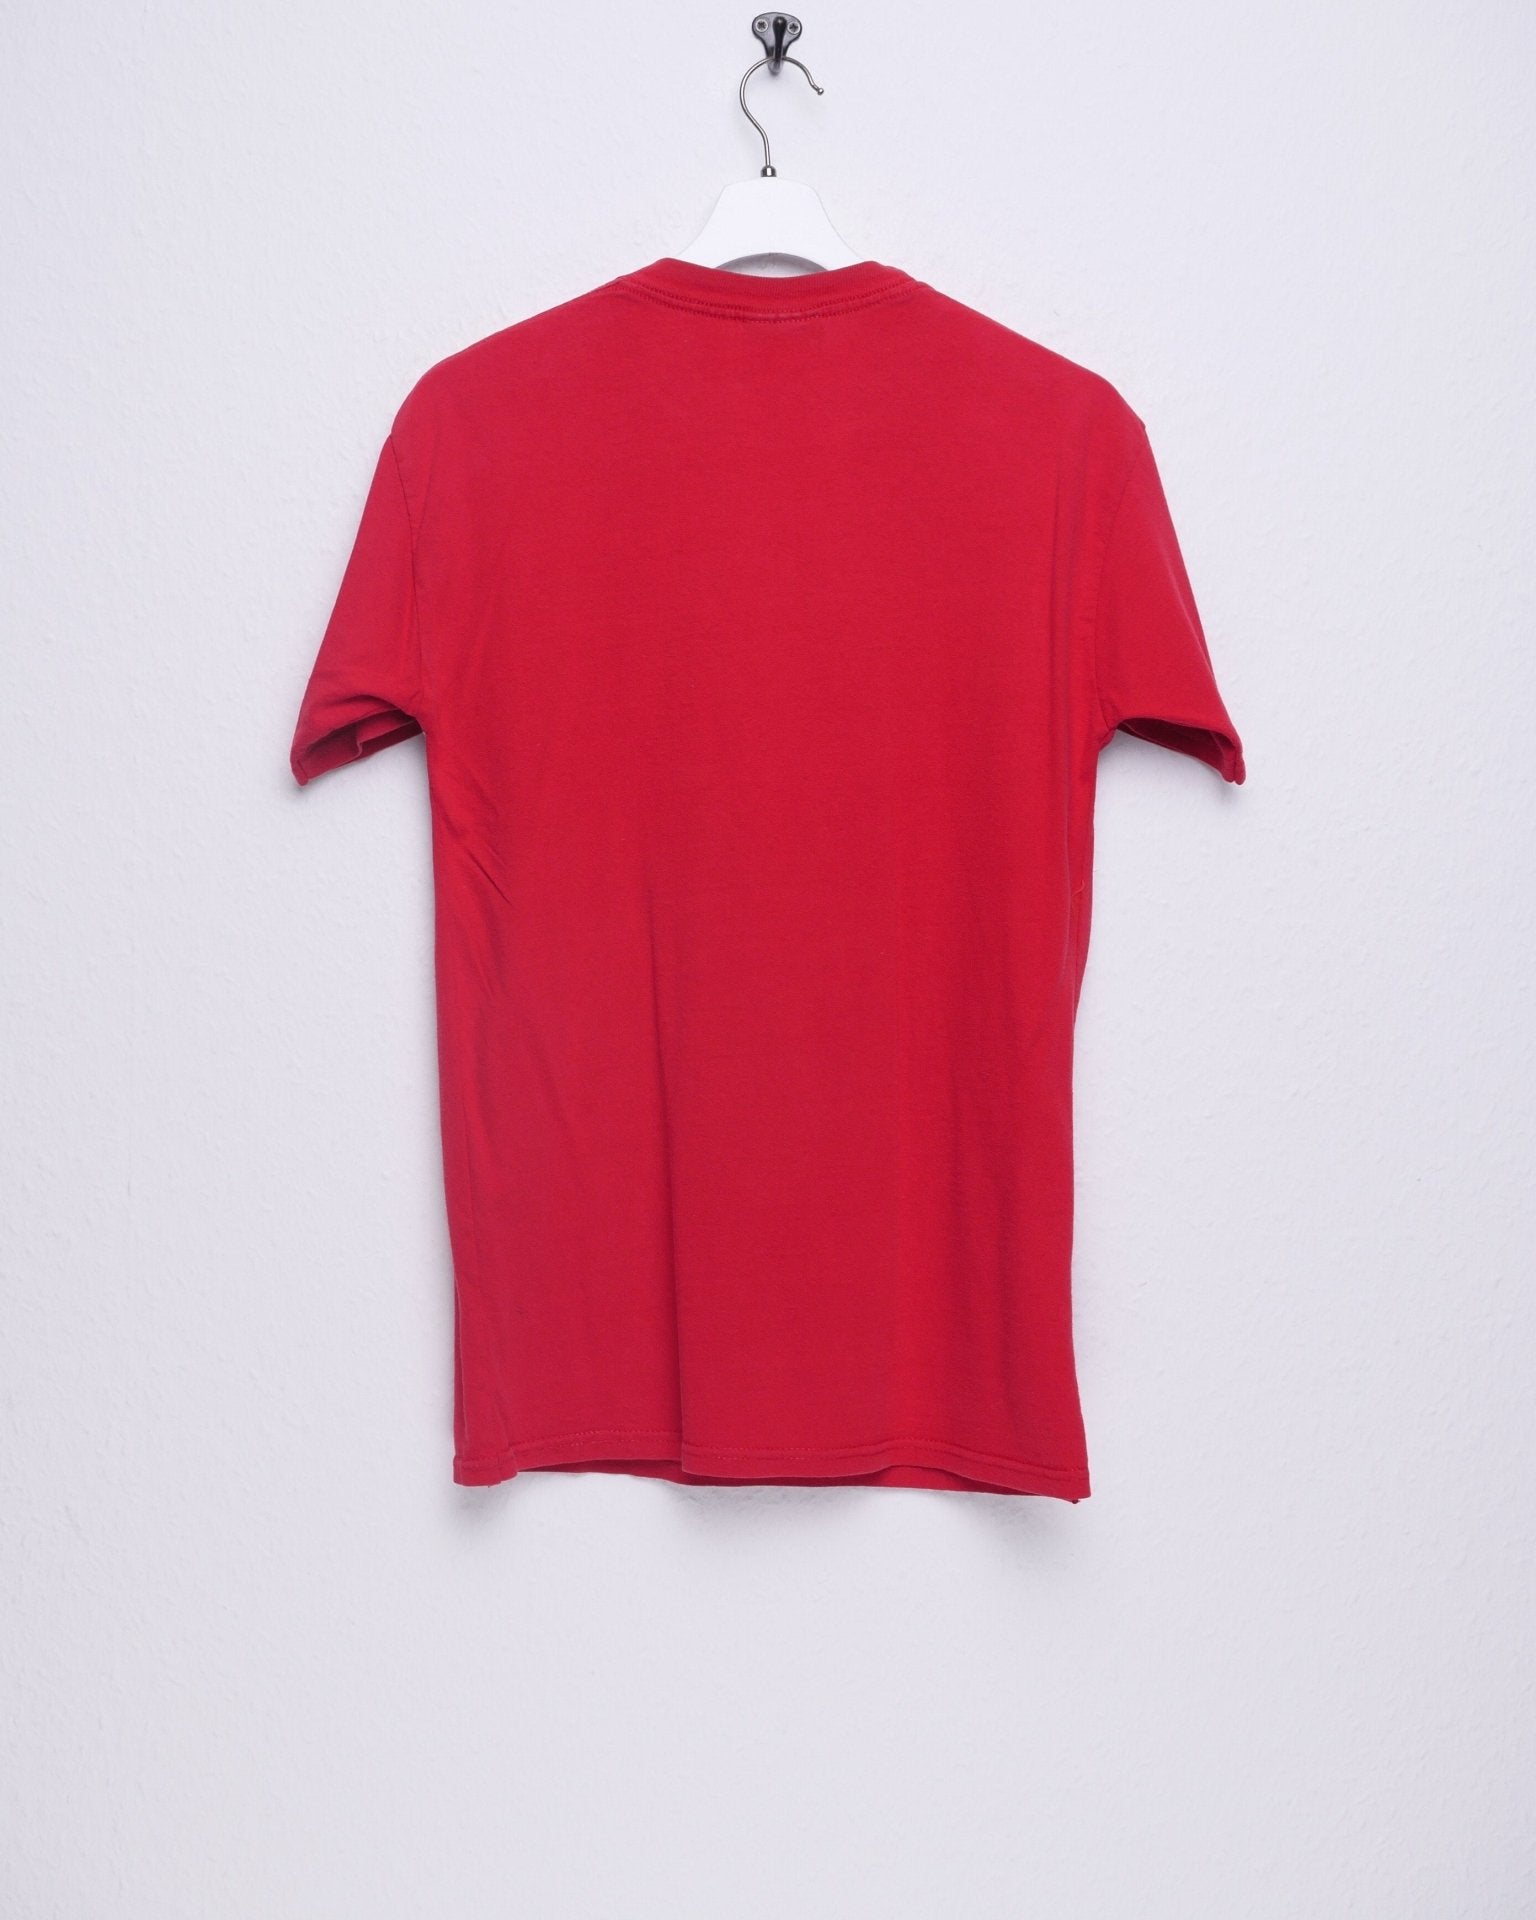 'USA' embroidered Spellout red Shirt - Peeces